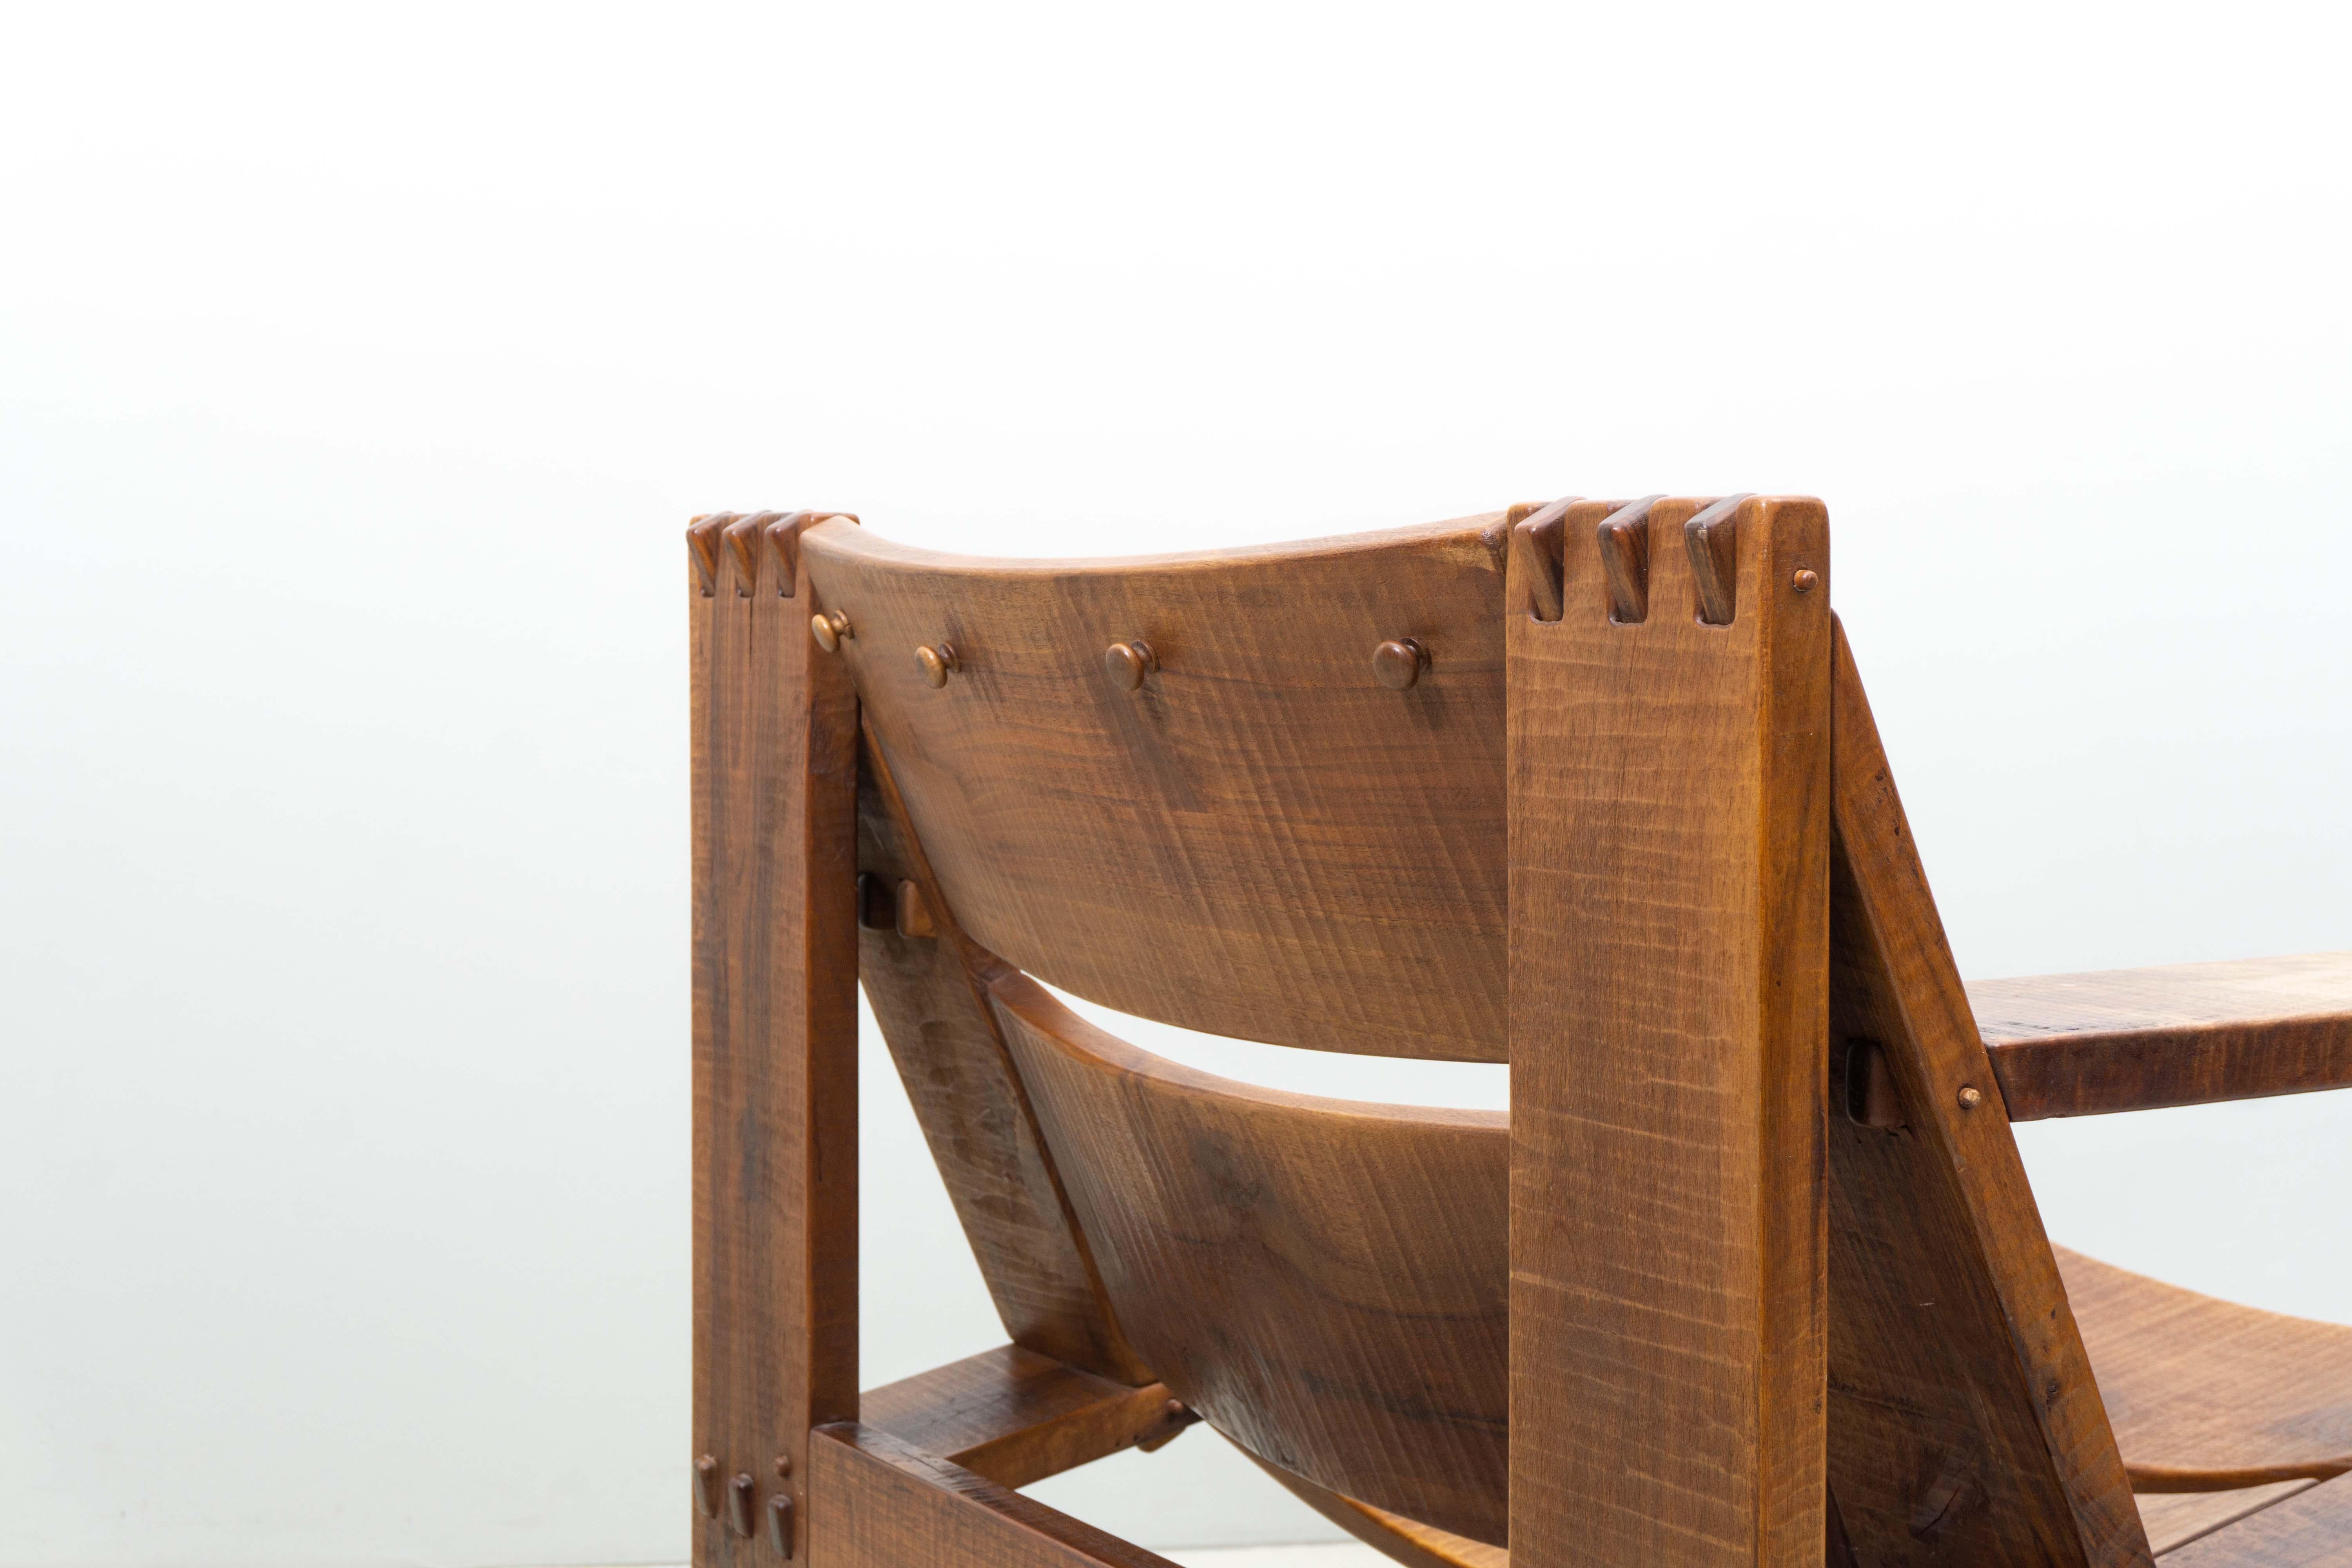 Hand-Carved Chairs with Armrests by Guiseppe Rivadossi, ca. 1970